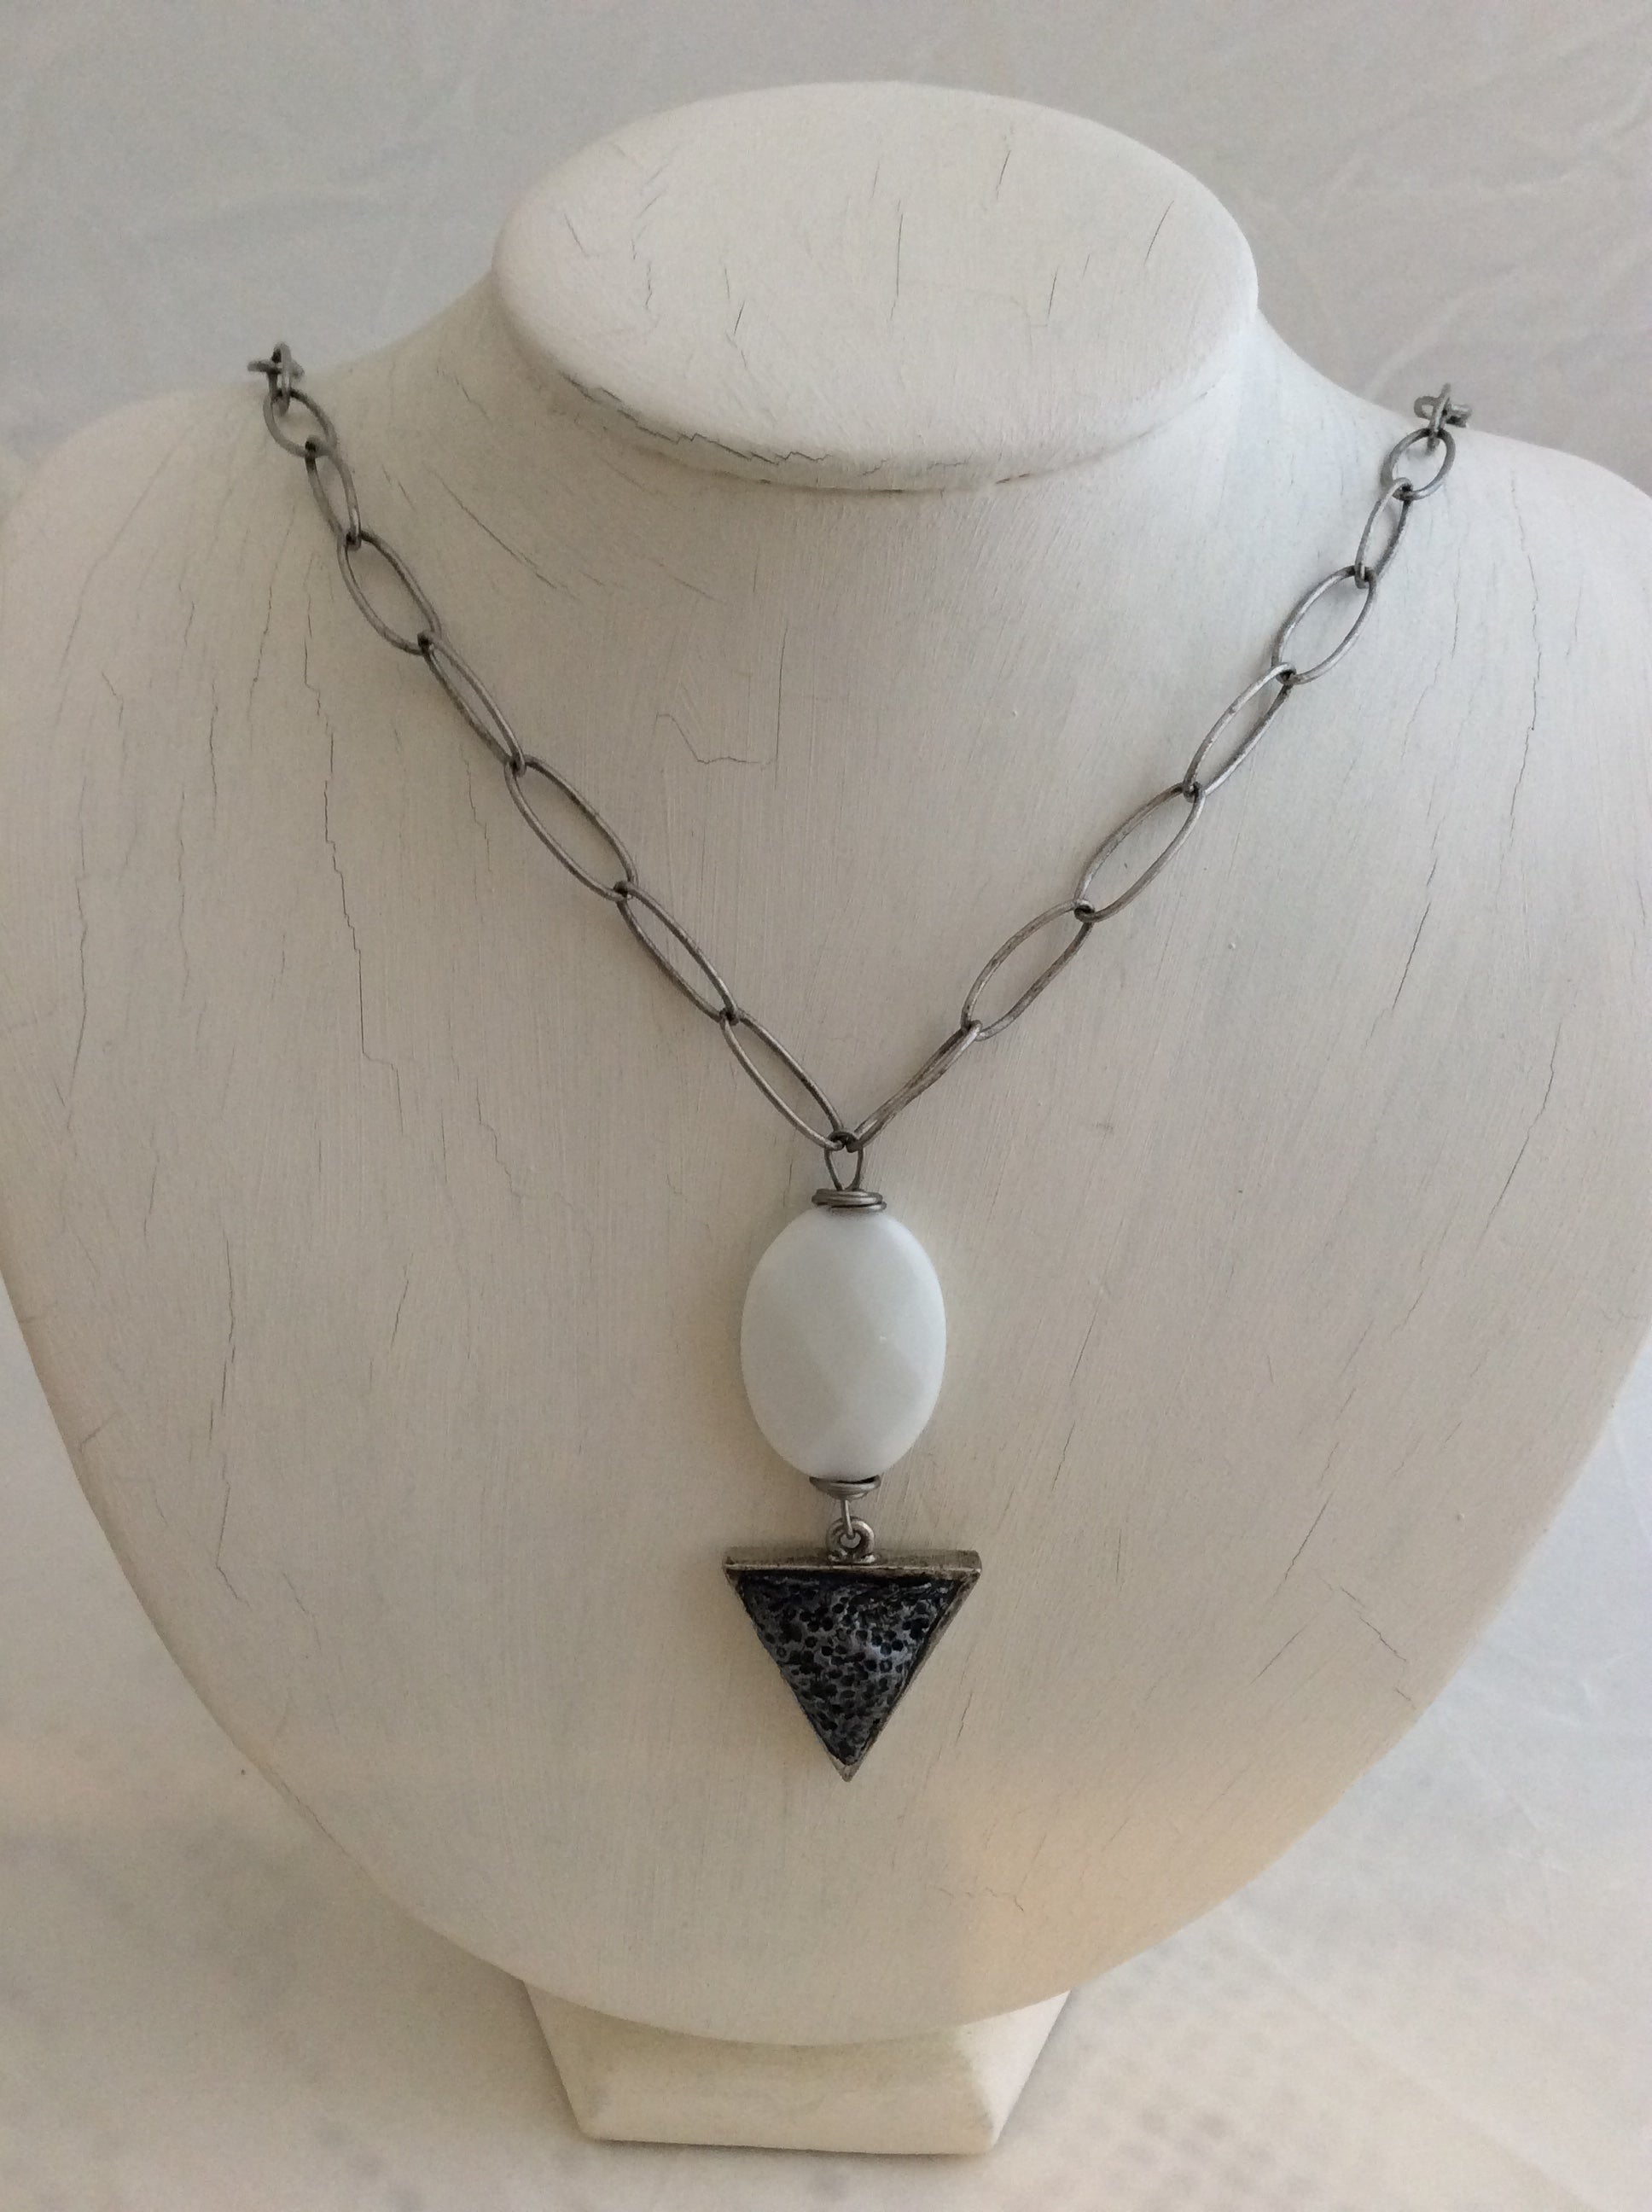 Oval White Stone w/Triangle Pendant on Silver Chain Necklace - Five and Divine